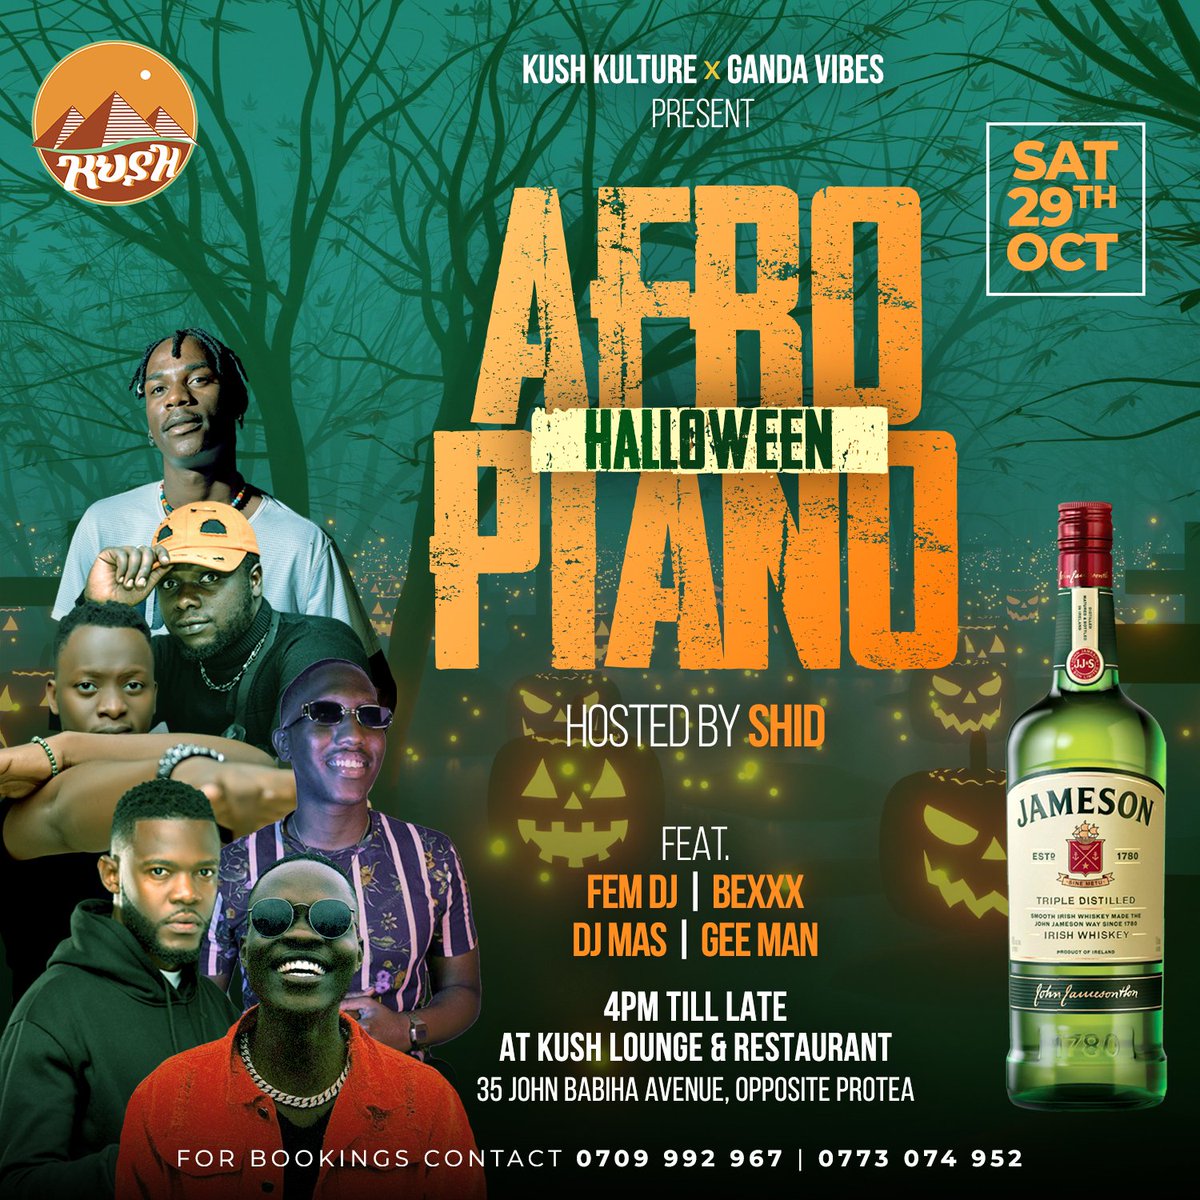 Trick or treat yo’ self to the best Halloween party this weekend with Ganda Vibes' Afro-piano with guest Dj @fem_dj alongside @Bexx_A_Dj, @Geeman_ManAStar, @Deejay_Mas_256 & @rashidkyonjo. Don't forget there's prizes to be won for best dressed 👻. Book your table. #Kushalloween